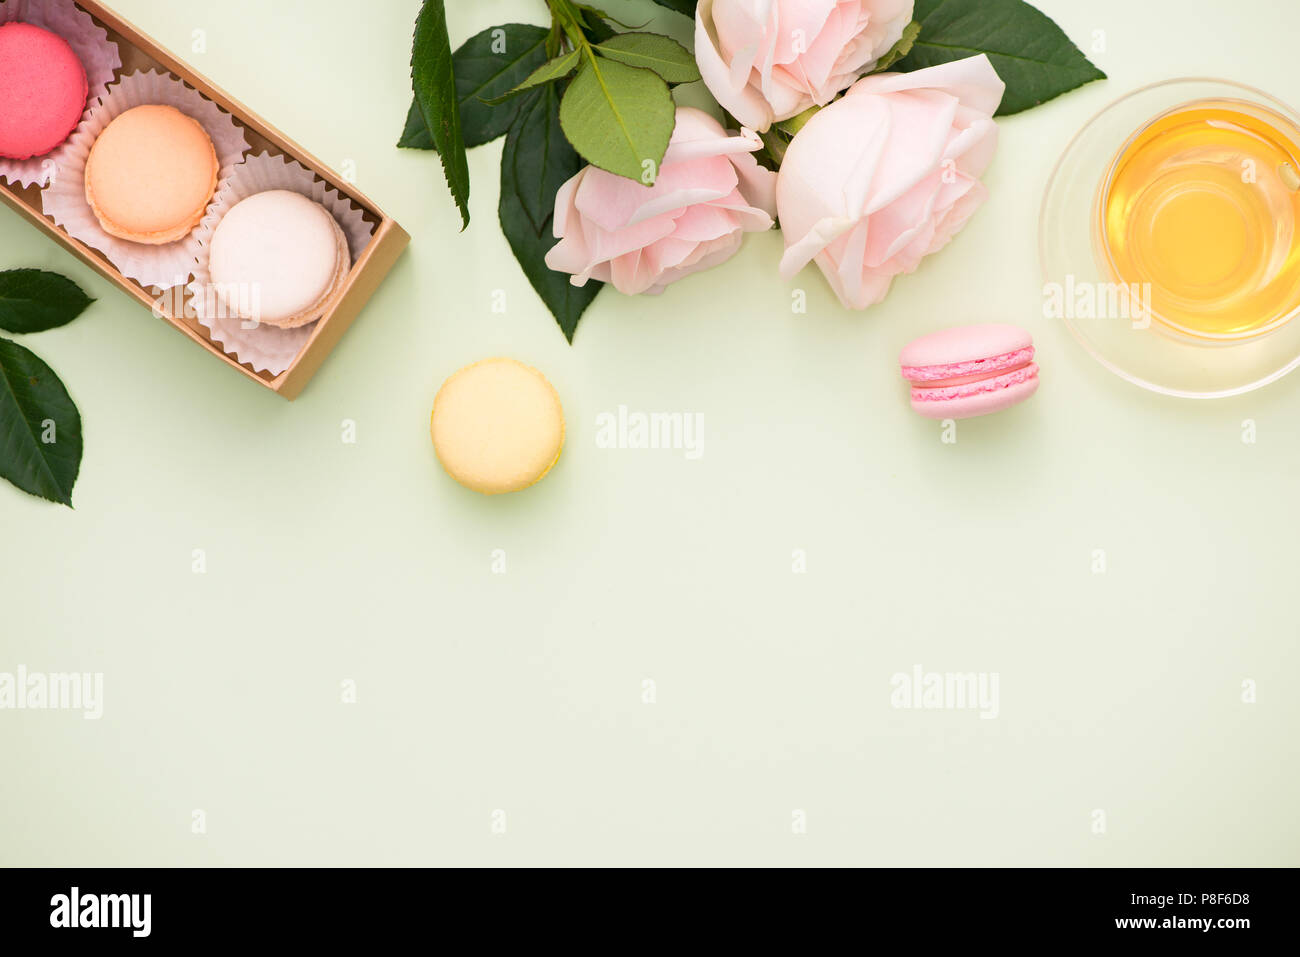 Colorful macaroons and rose flowers with gift box on wooden table. Sweet macarons in gift box. Top view Stock Photo